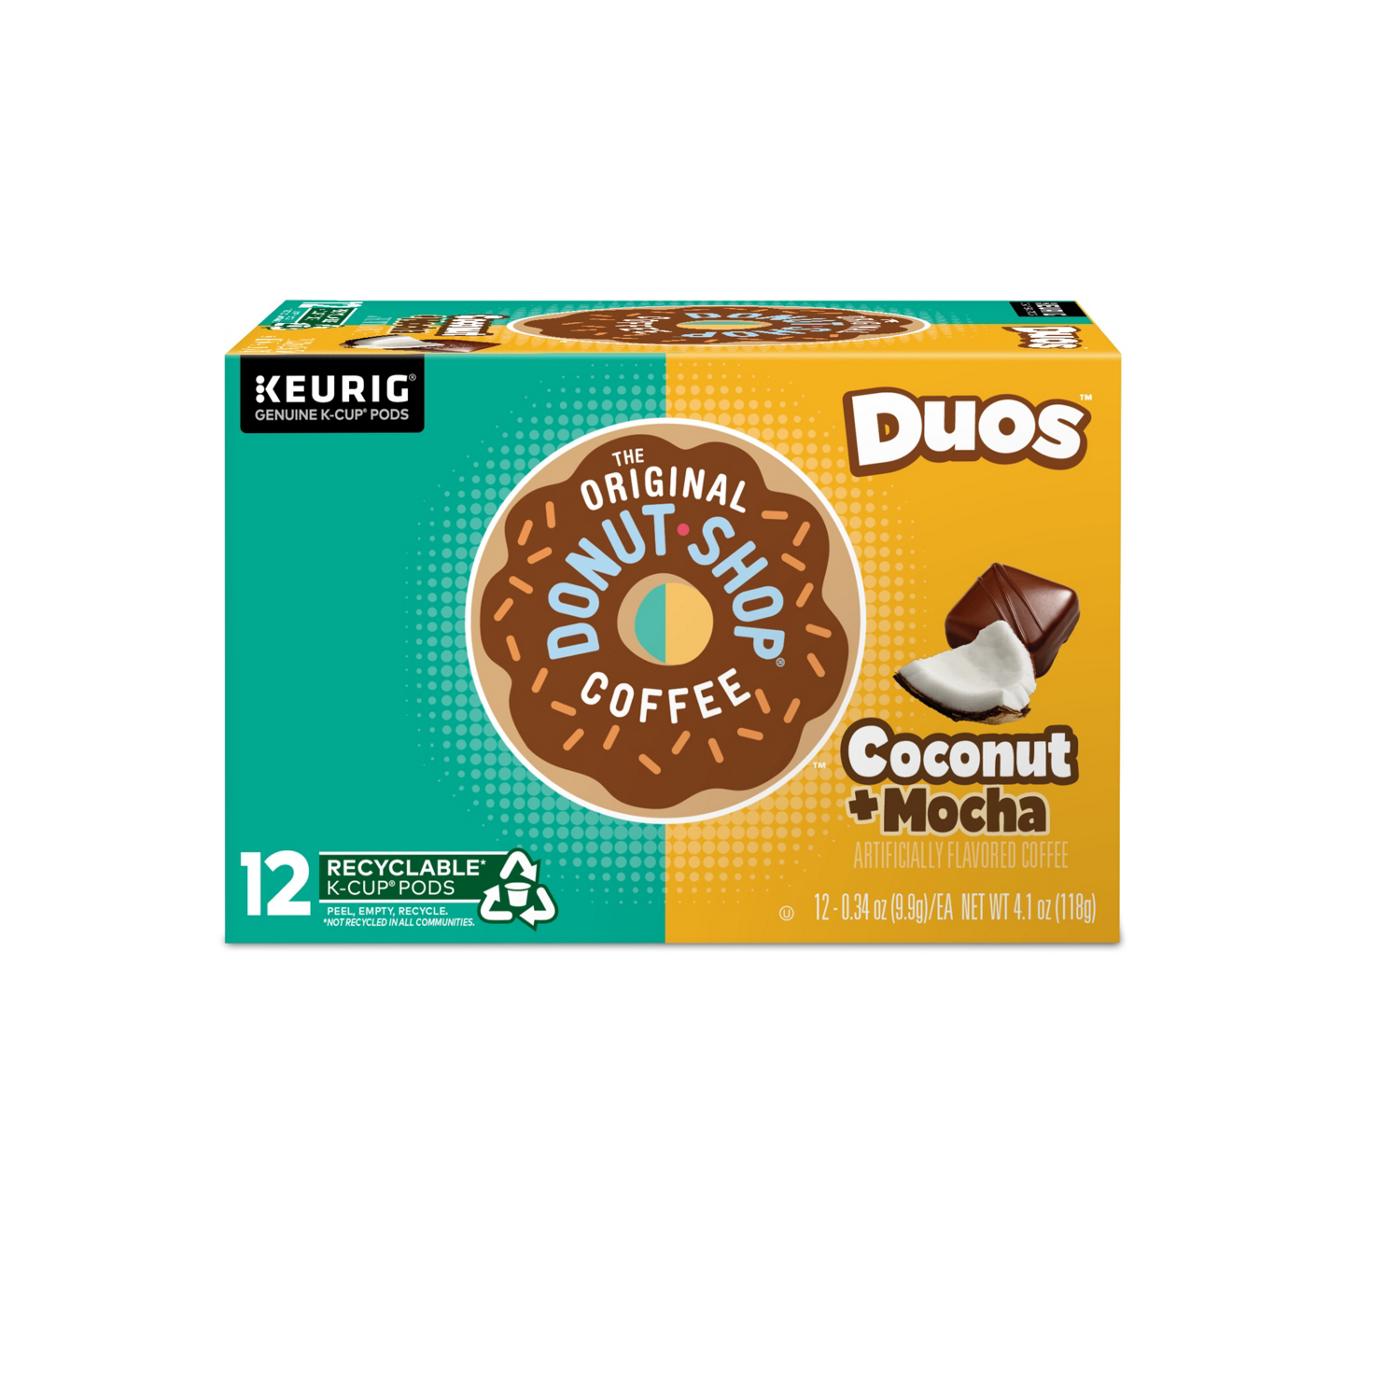 Donut Shop Duos Coconut and Mocha Single Serve Coffee K Cups; image 9 of 11